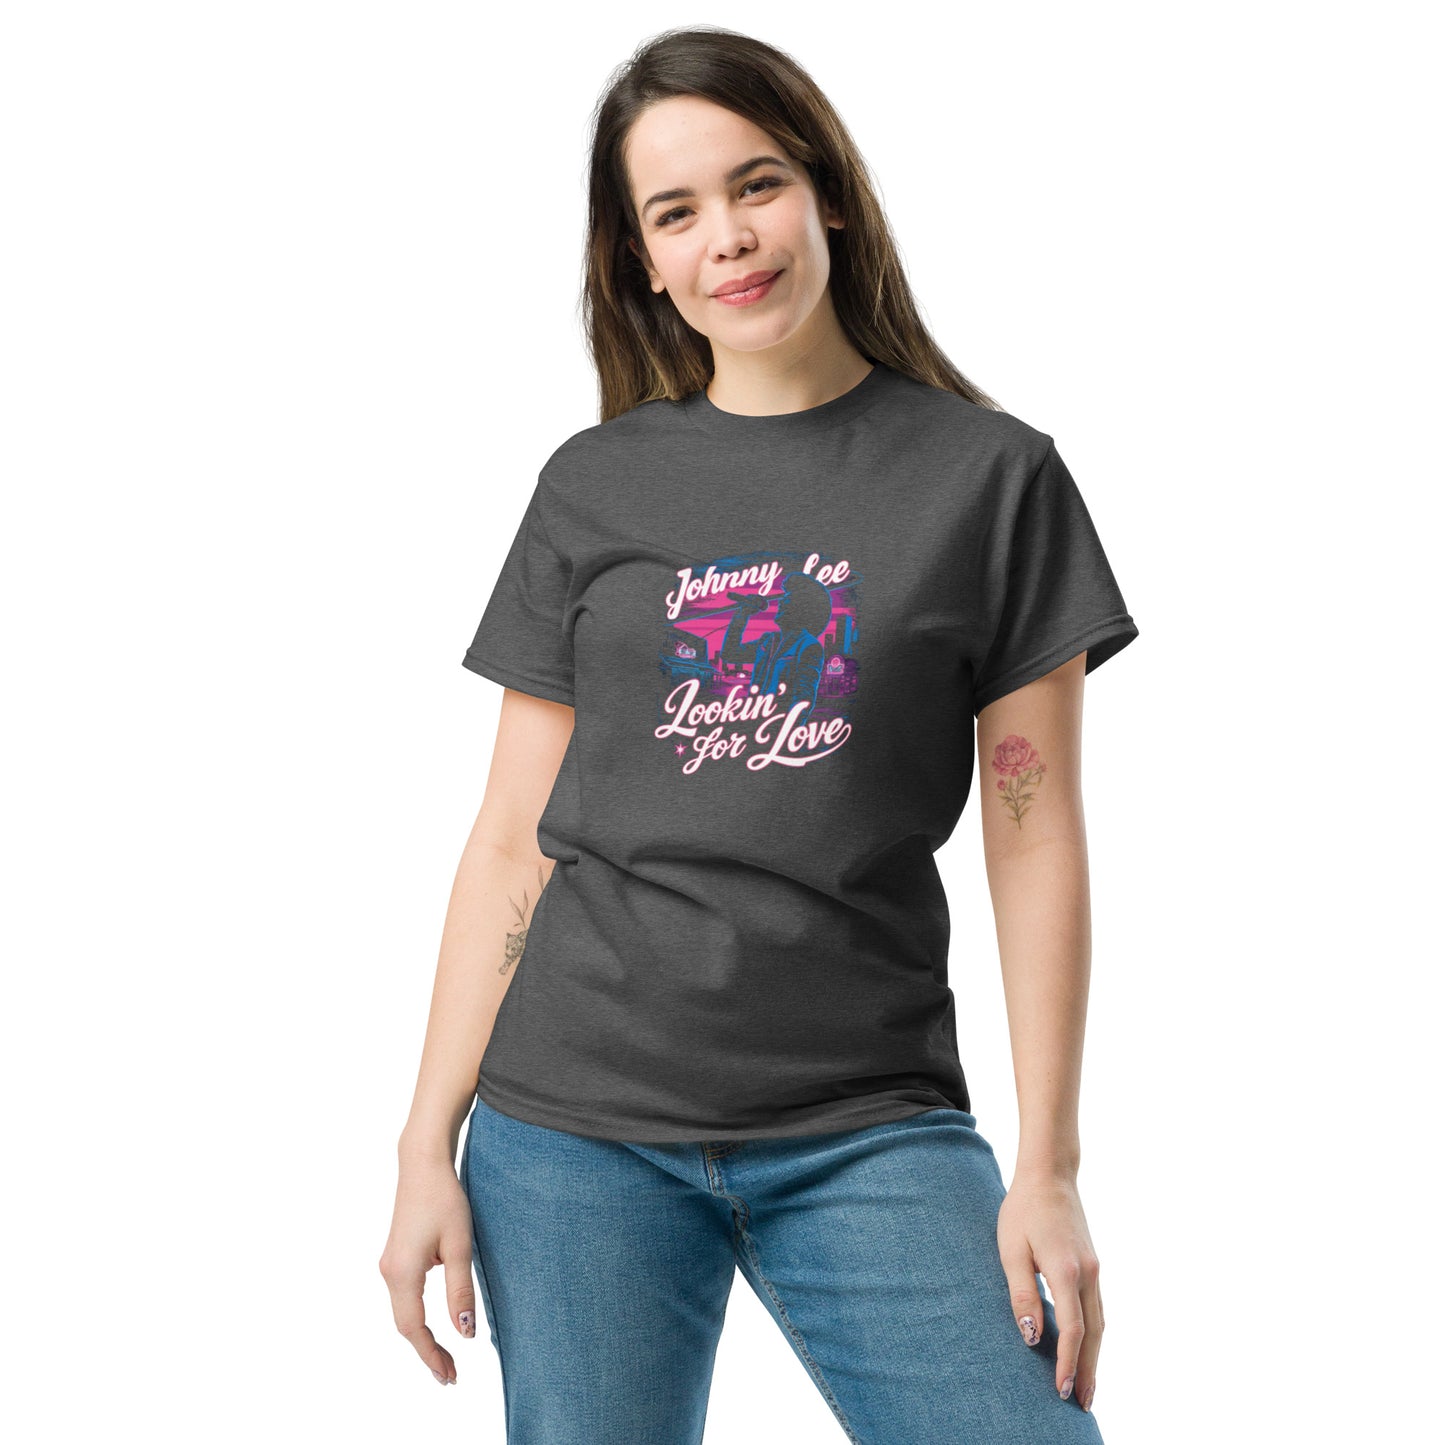 Lookin' For Love - Inspired by Johnny Lee | Classic Country Tees